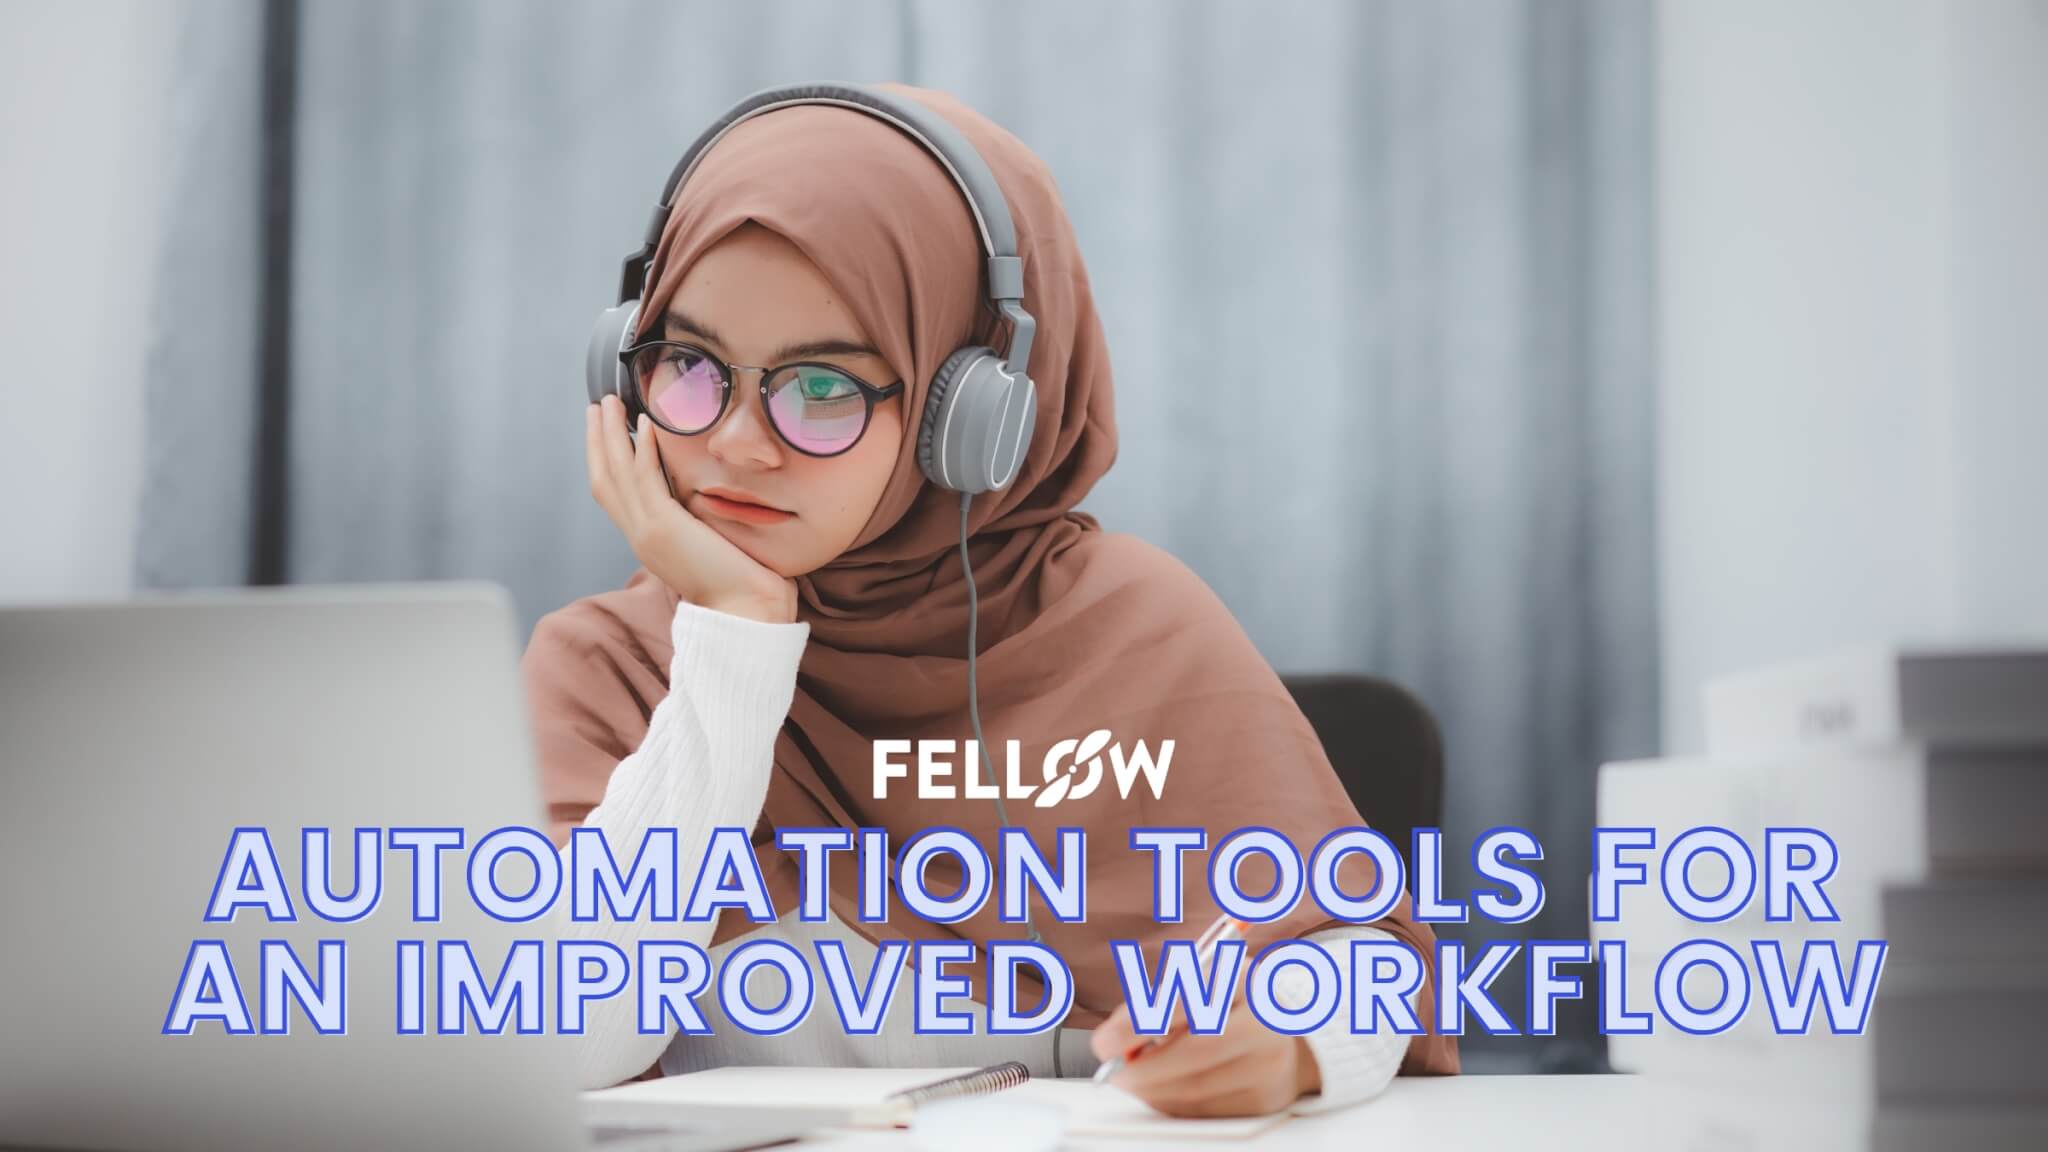 10 Automation Tools for an Improved Workflow